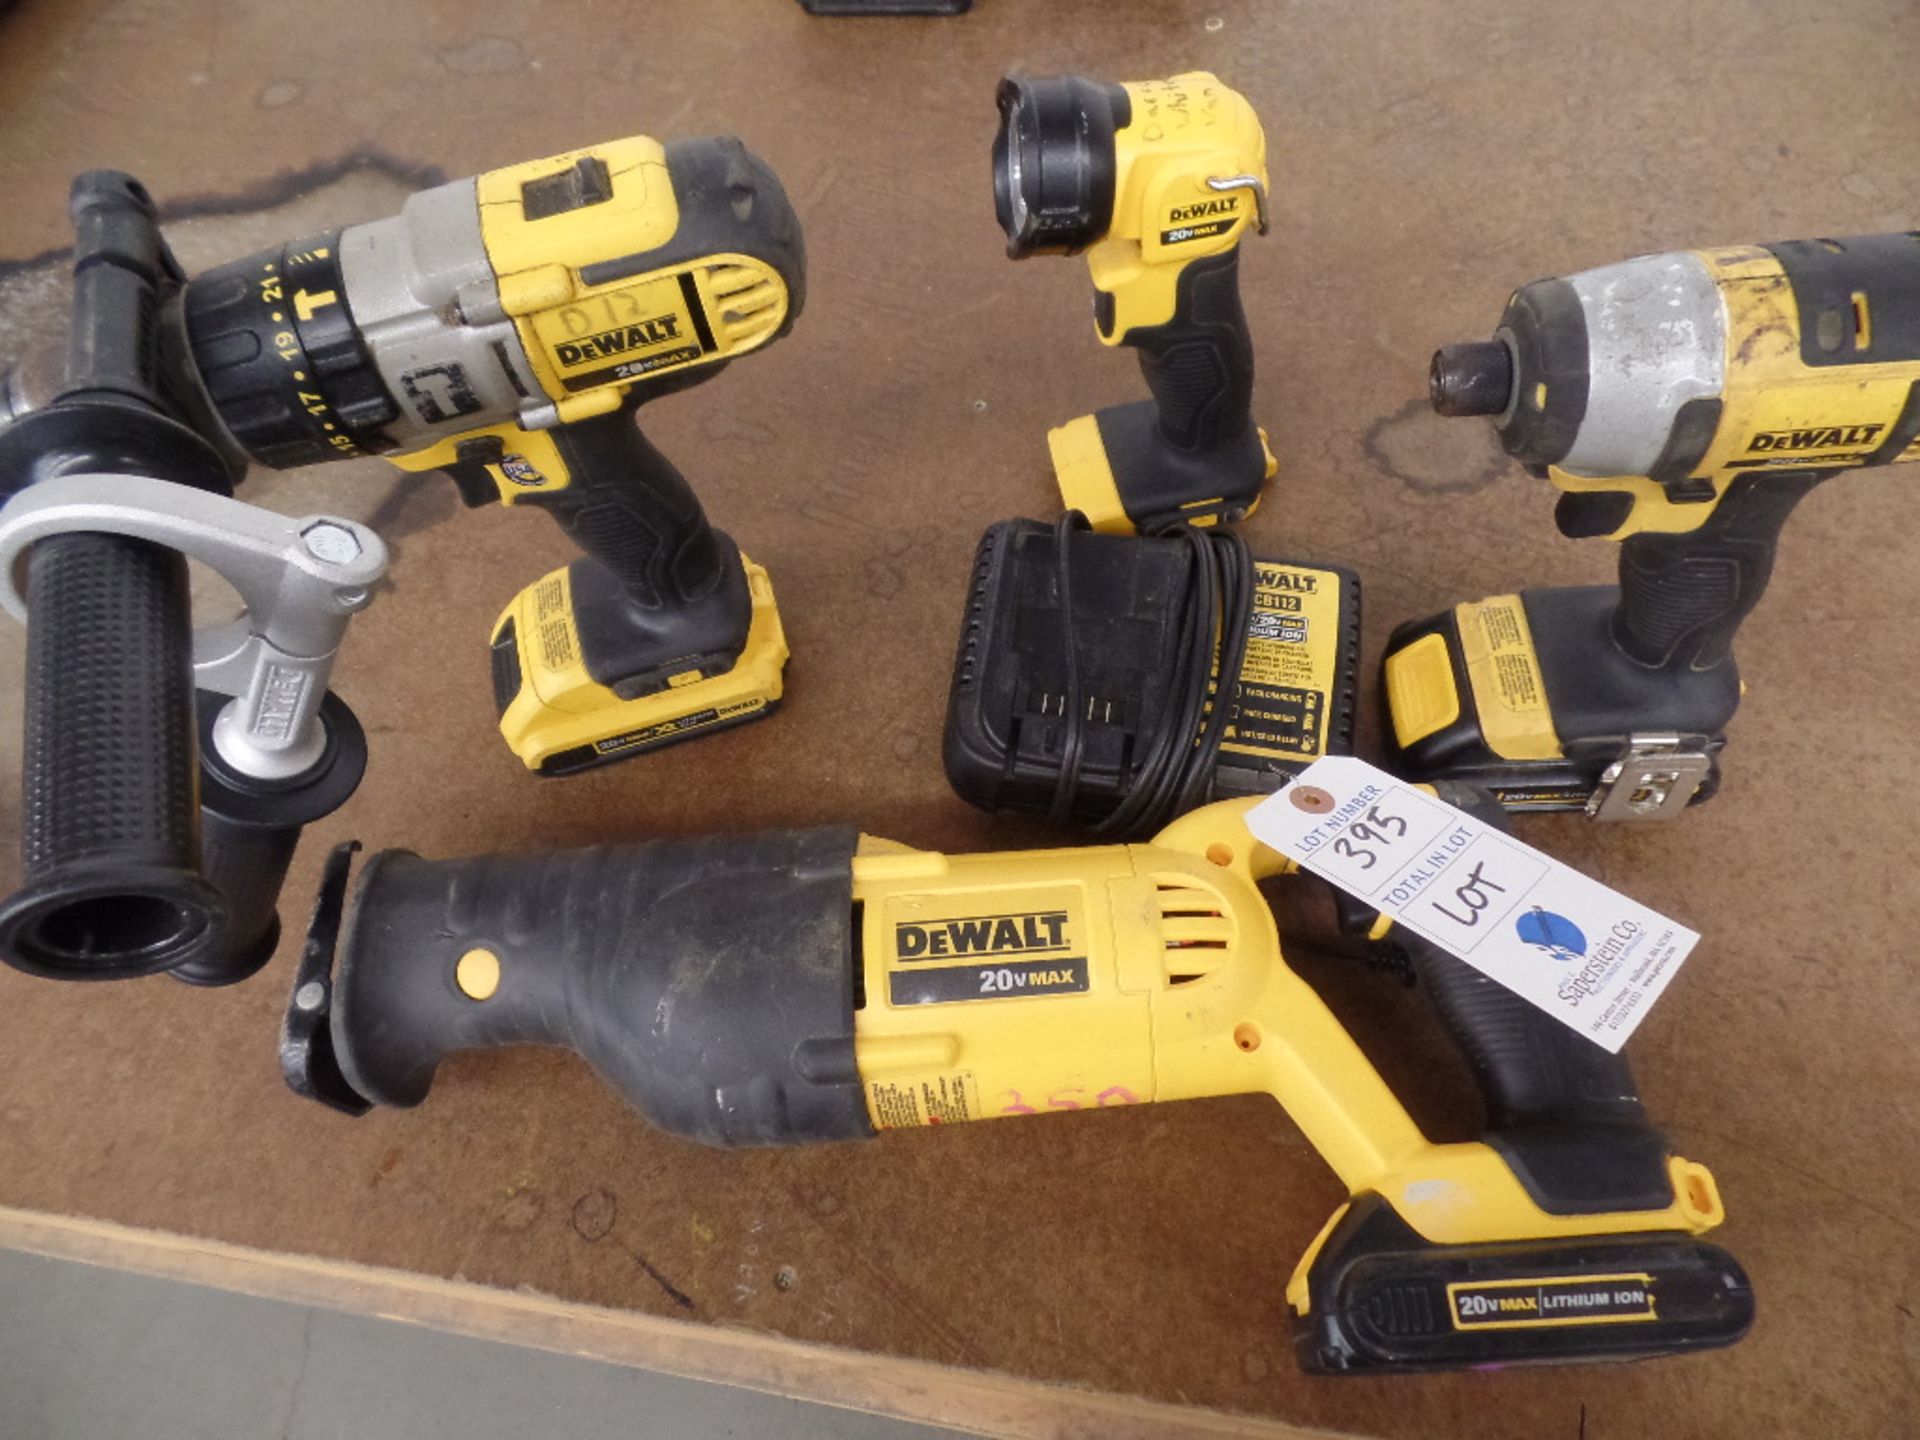 {LOT} Dewalt DCS380 Variable Speed Reciprocating Saw W/ Battery, DCD985 1/2" Cordless Drill Driver/